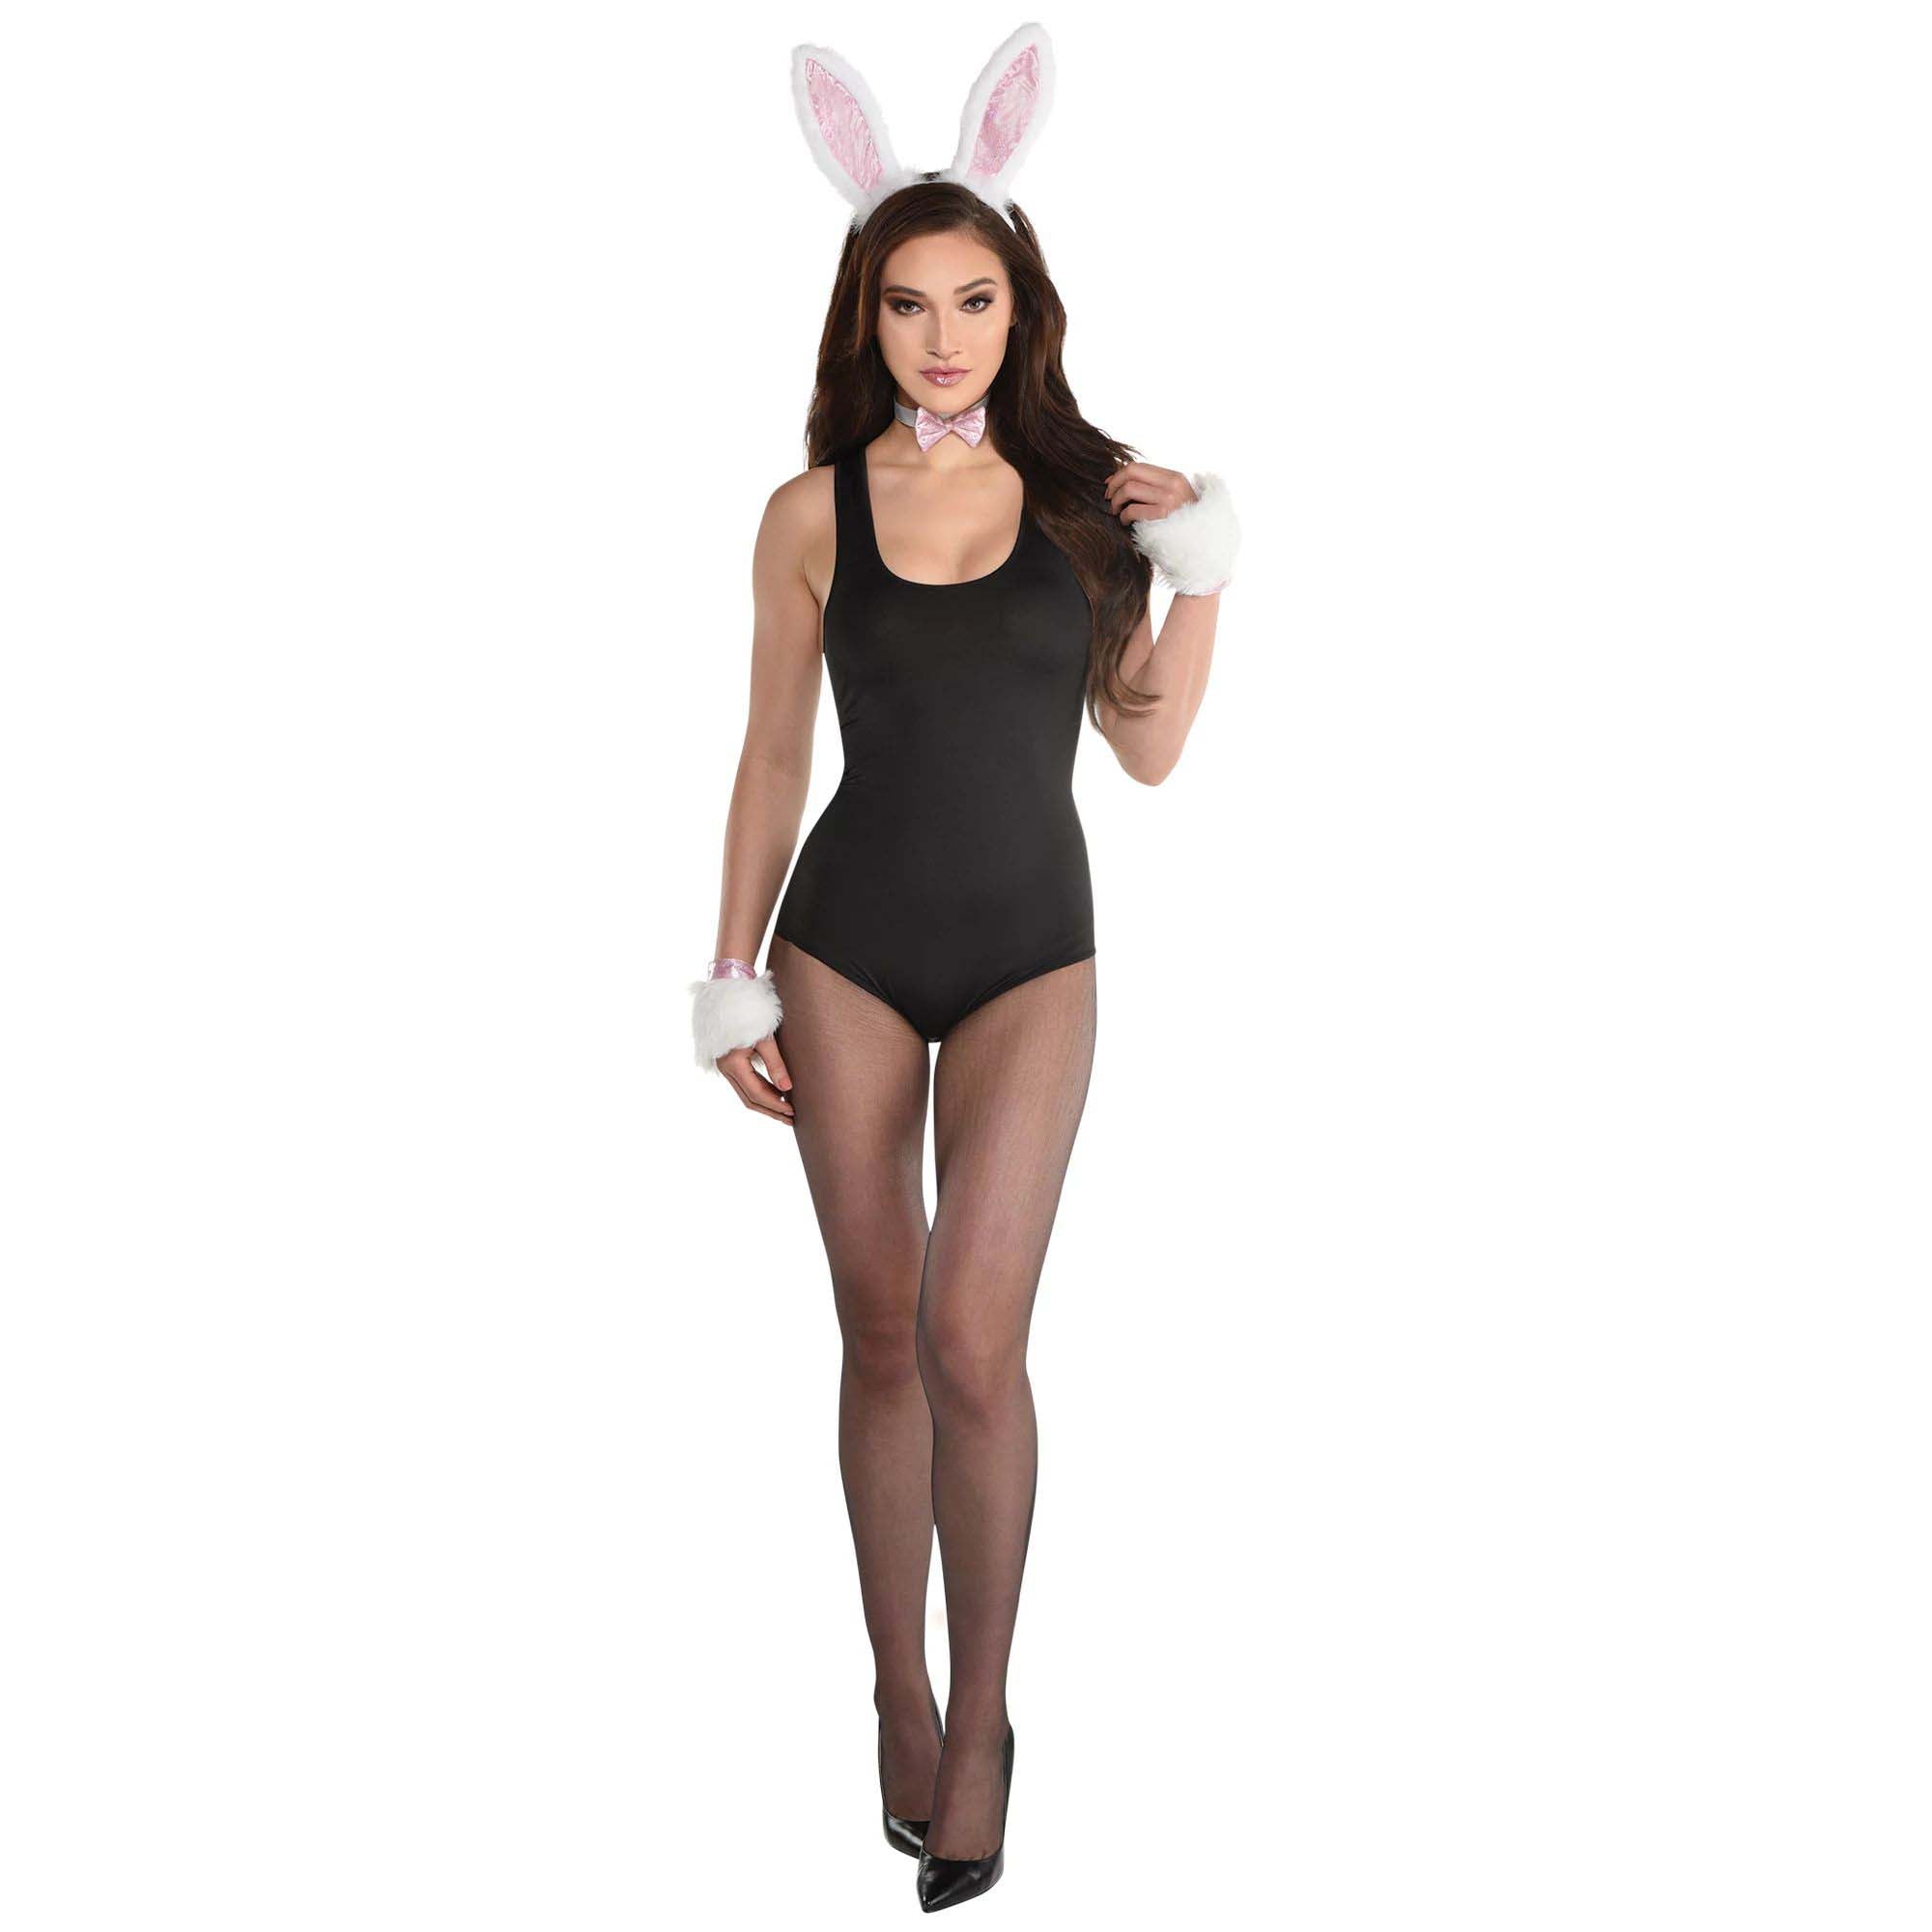 White and Pink Bunny Set for Adults